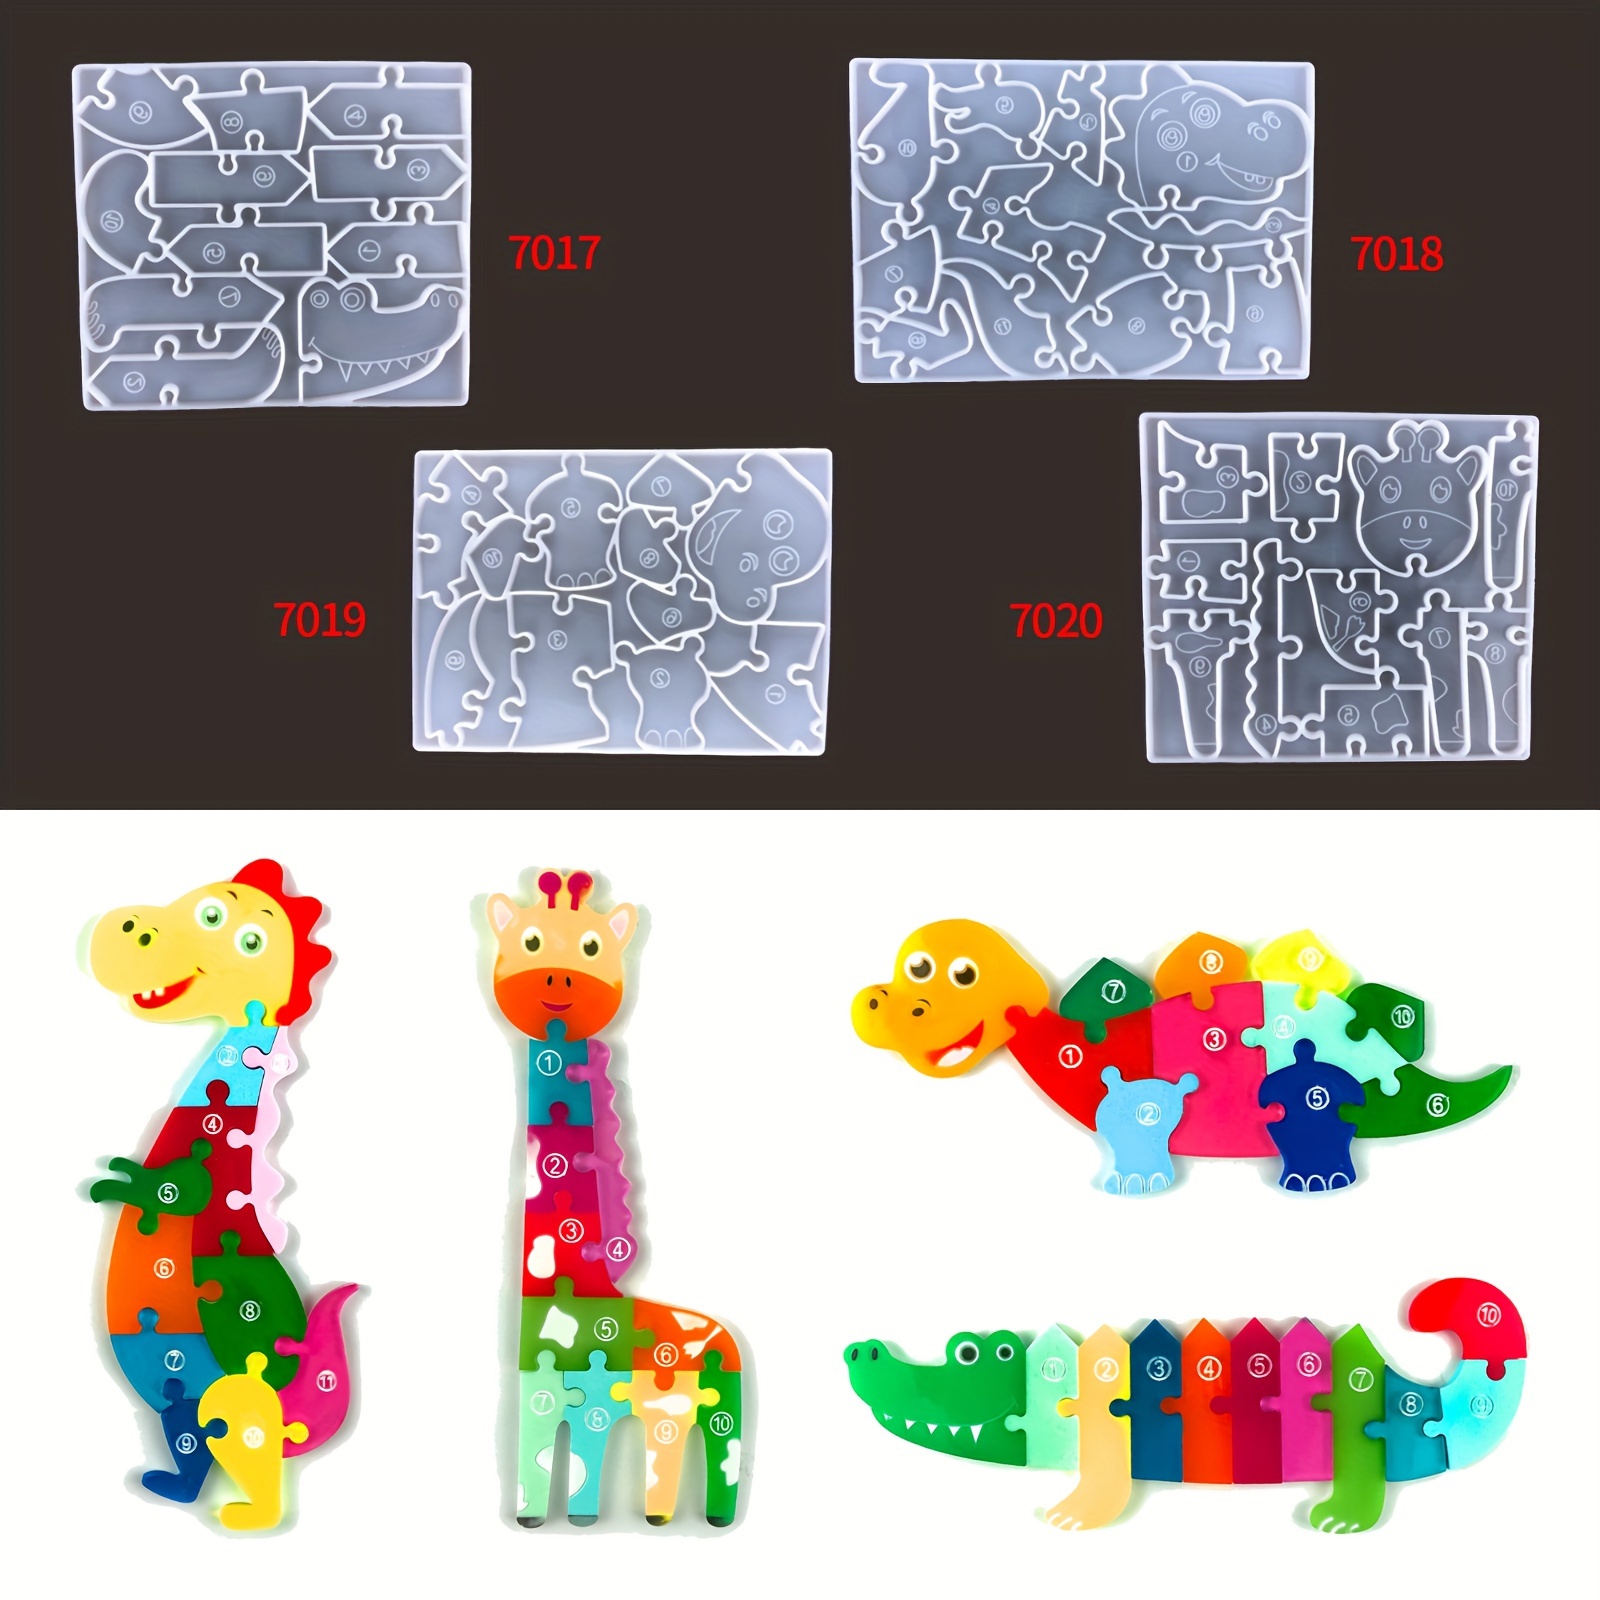 

prehistoric Play" Diy Dinosaur Puzzle Silicone Mold Kit - T-rex, Giraffe & Crocodile Shapes For Kids' Crafts And Jewelry Making